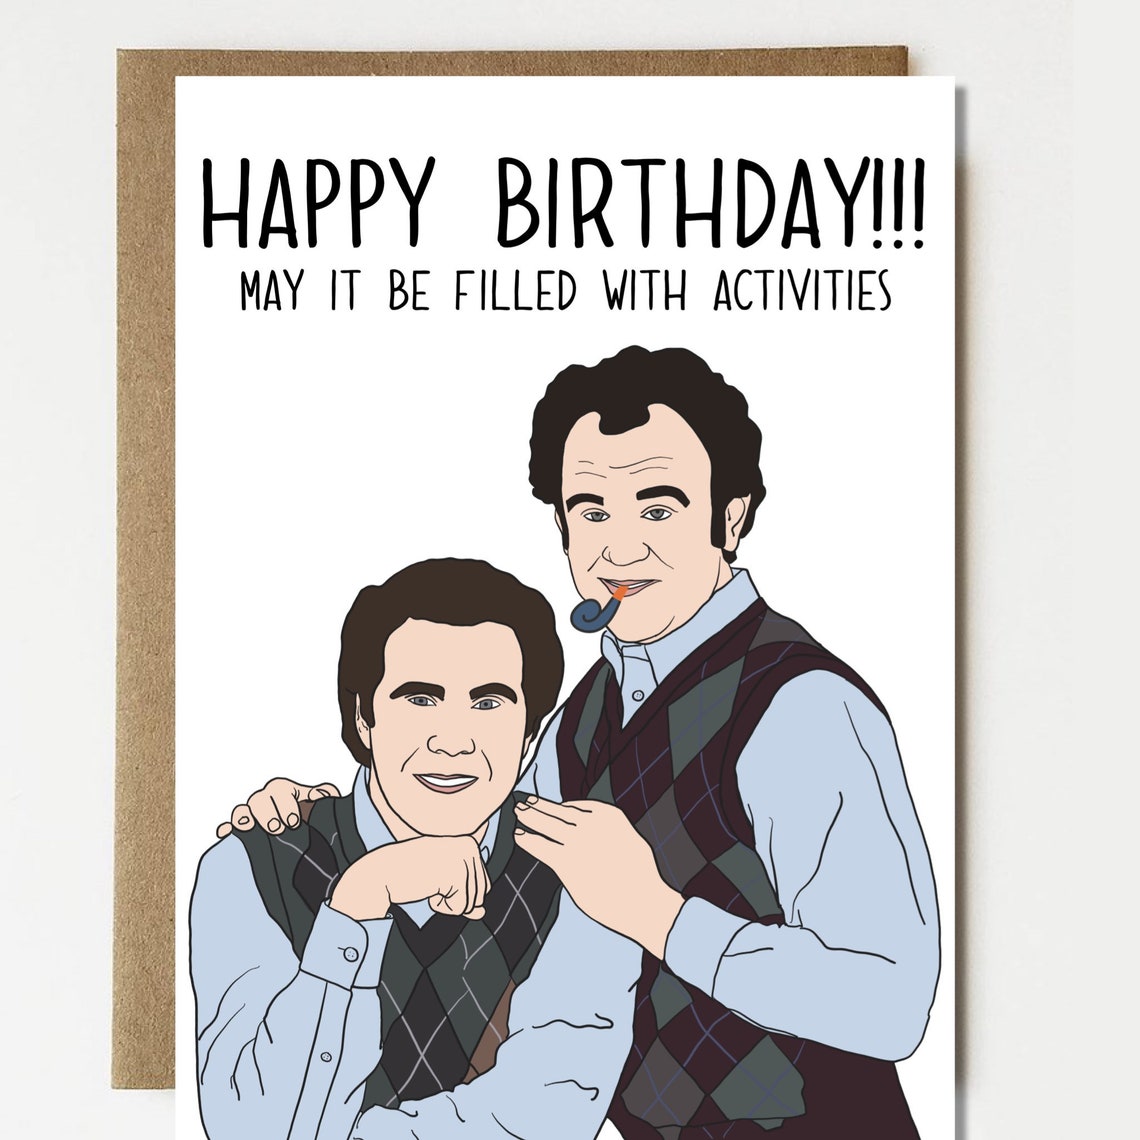 Funny Step Brothers the Movie Inspired Happy Birthday Card - Etsy